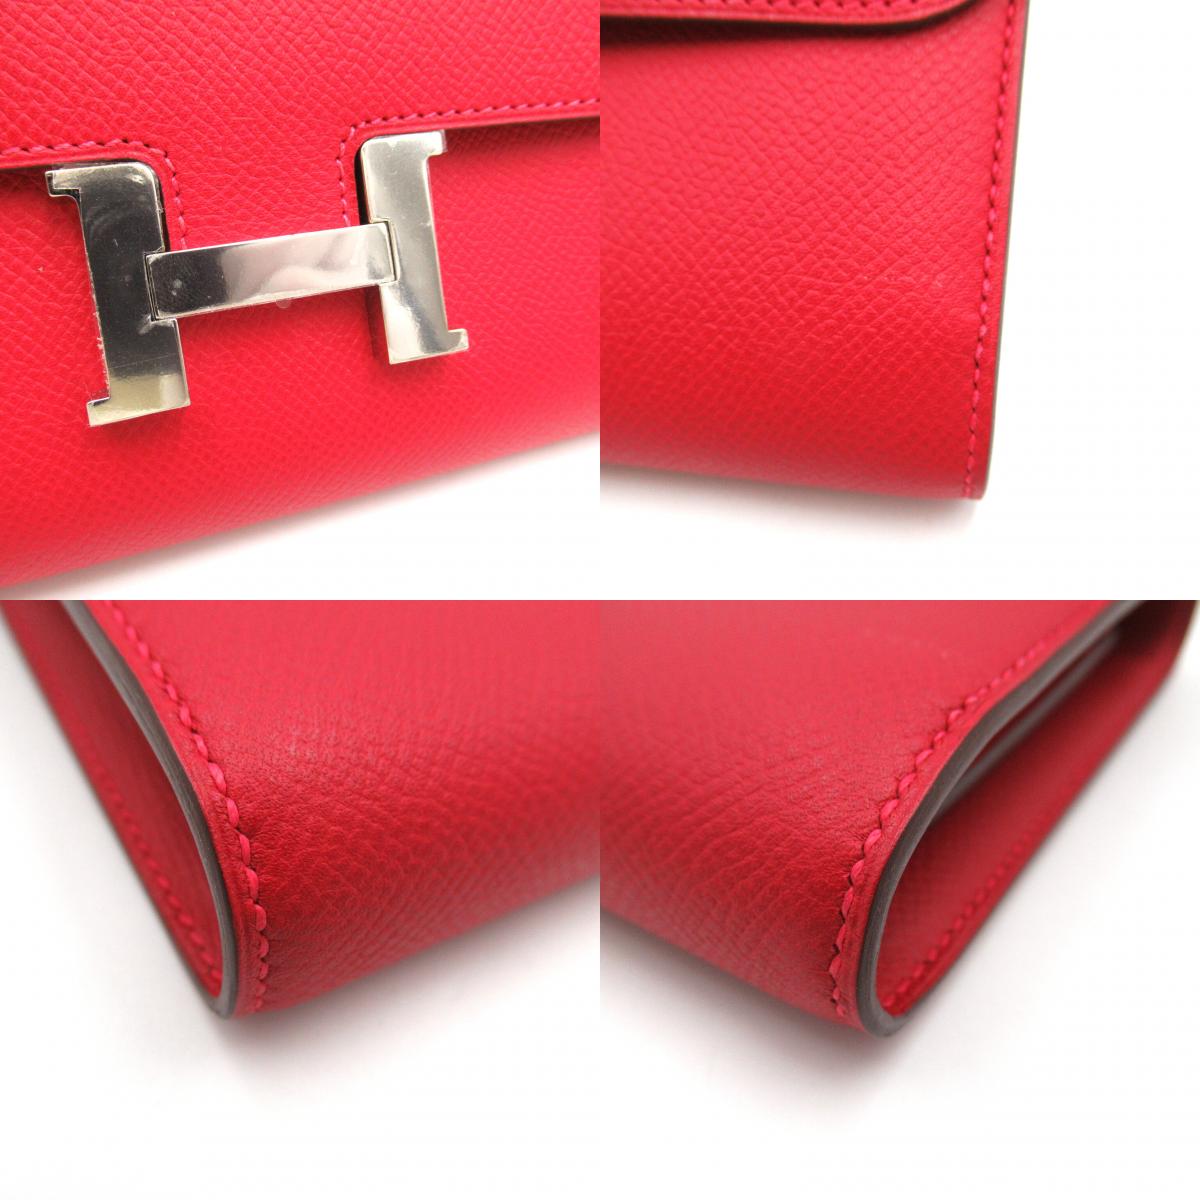 Hermes Hermes Constance Long Twin Fold Wallet Wallet Leather Epsom  Red